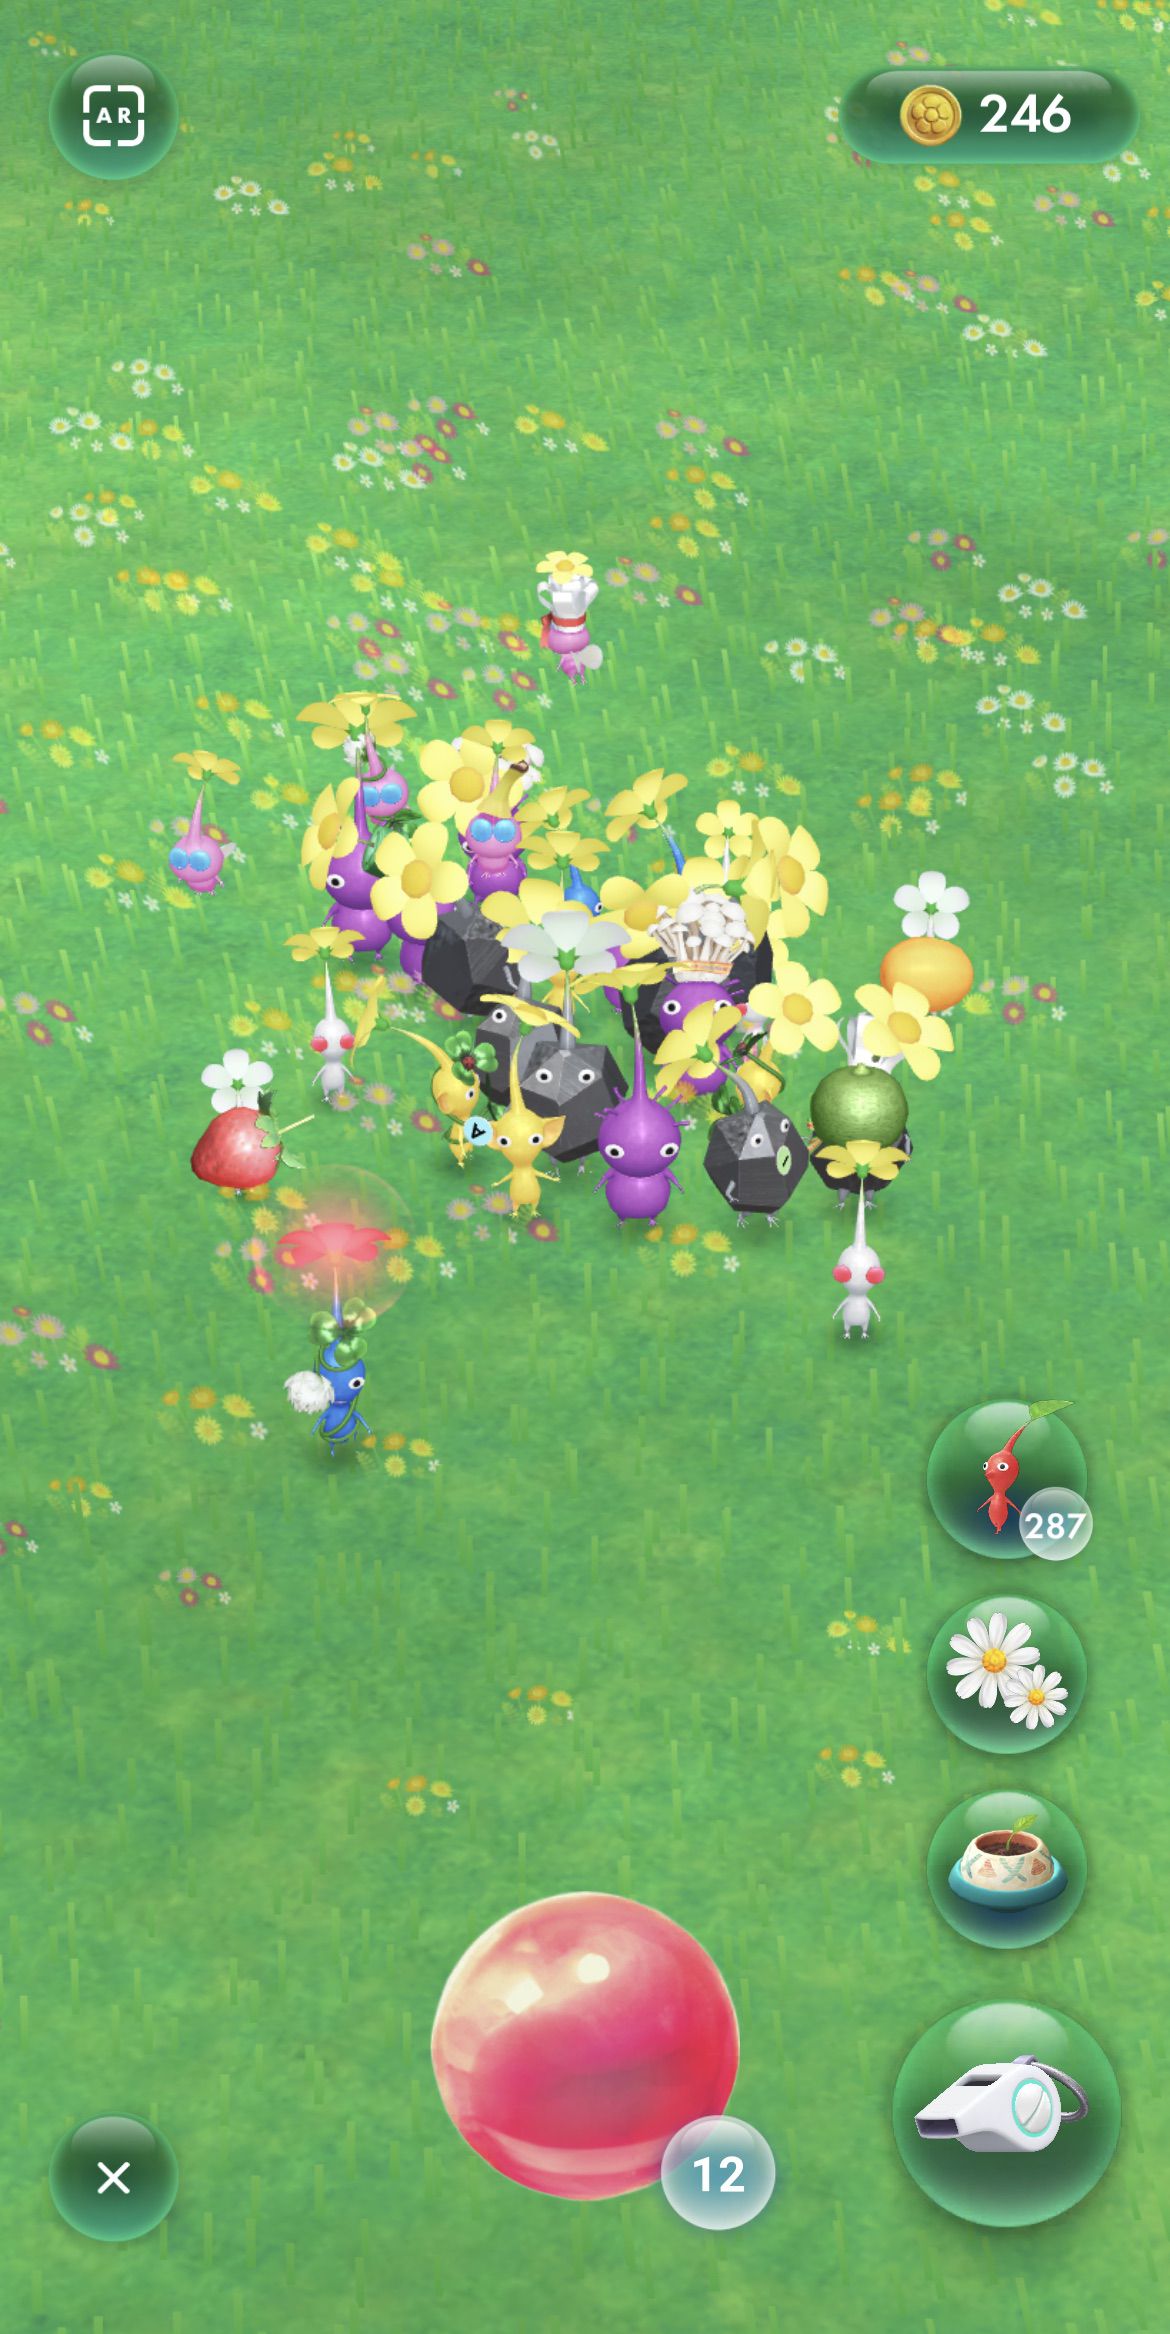 The Pikmin Bloom interface shows a player waiting to feed their Pikmin fruit